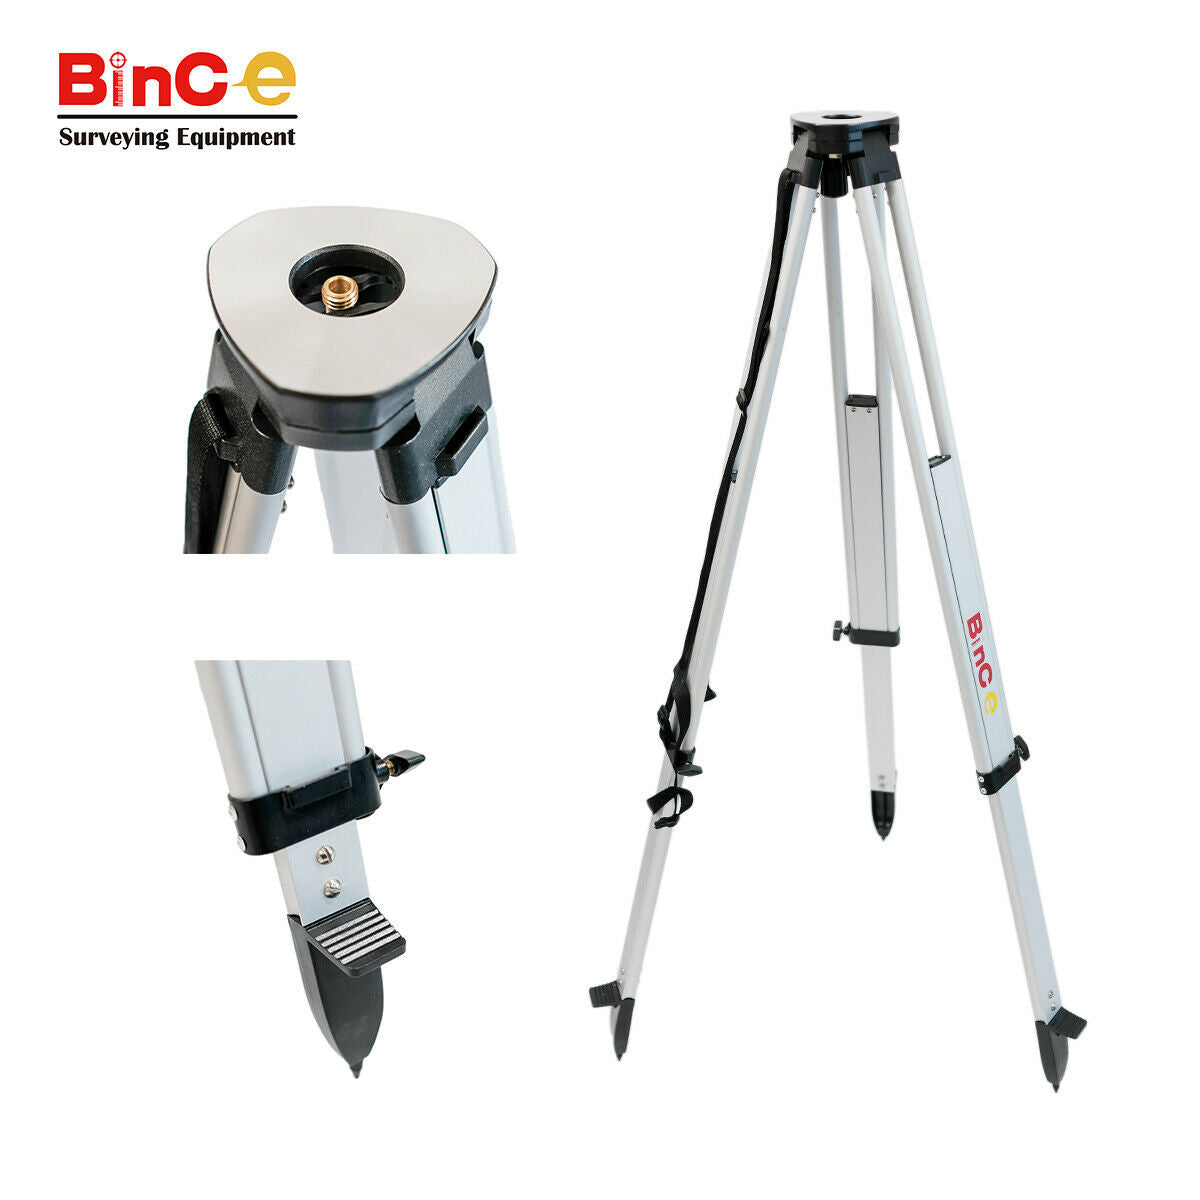 Green Beam Rotating Rotary Laser Level Dual Axis Grade Leveling &Tripod &Staff